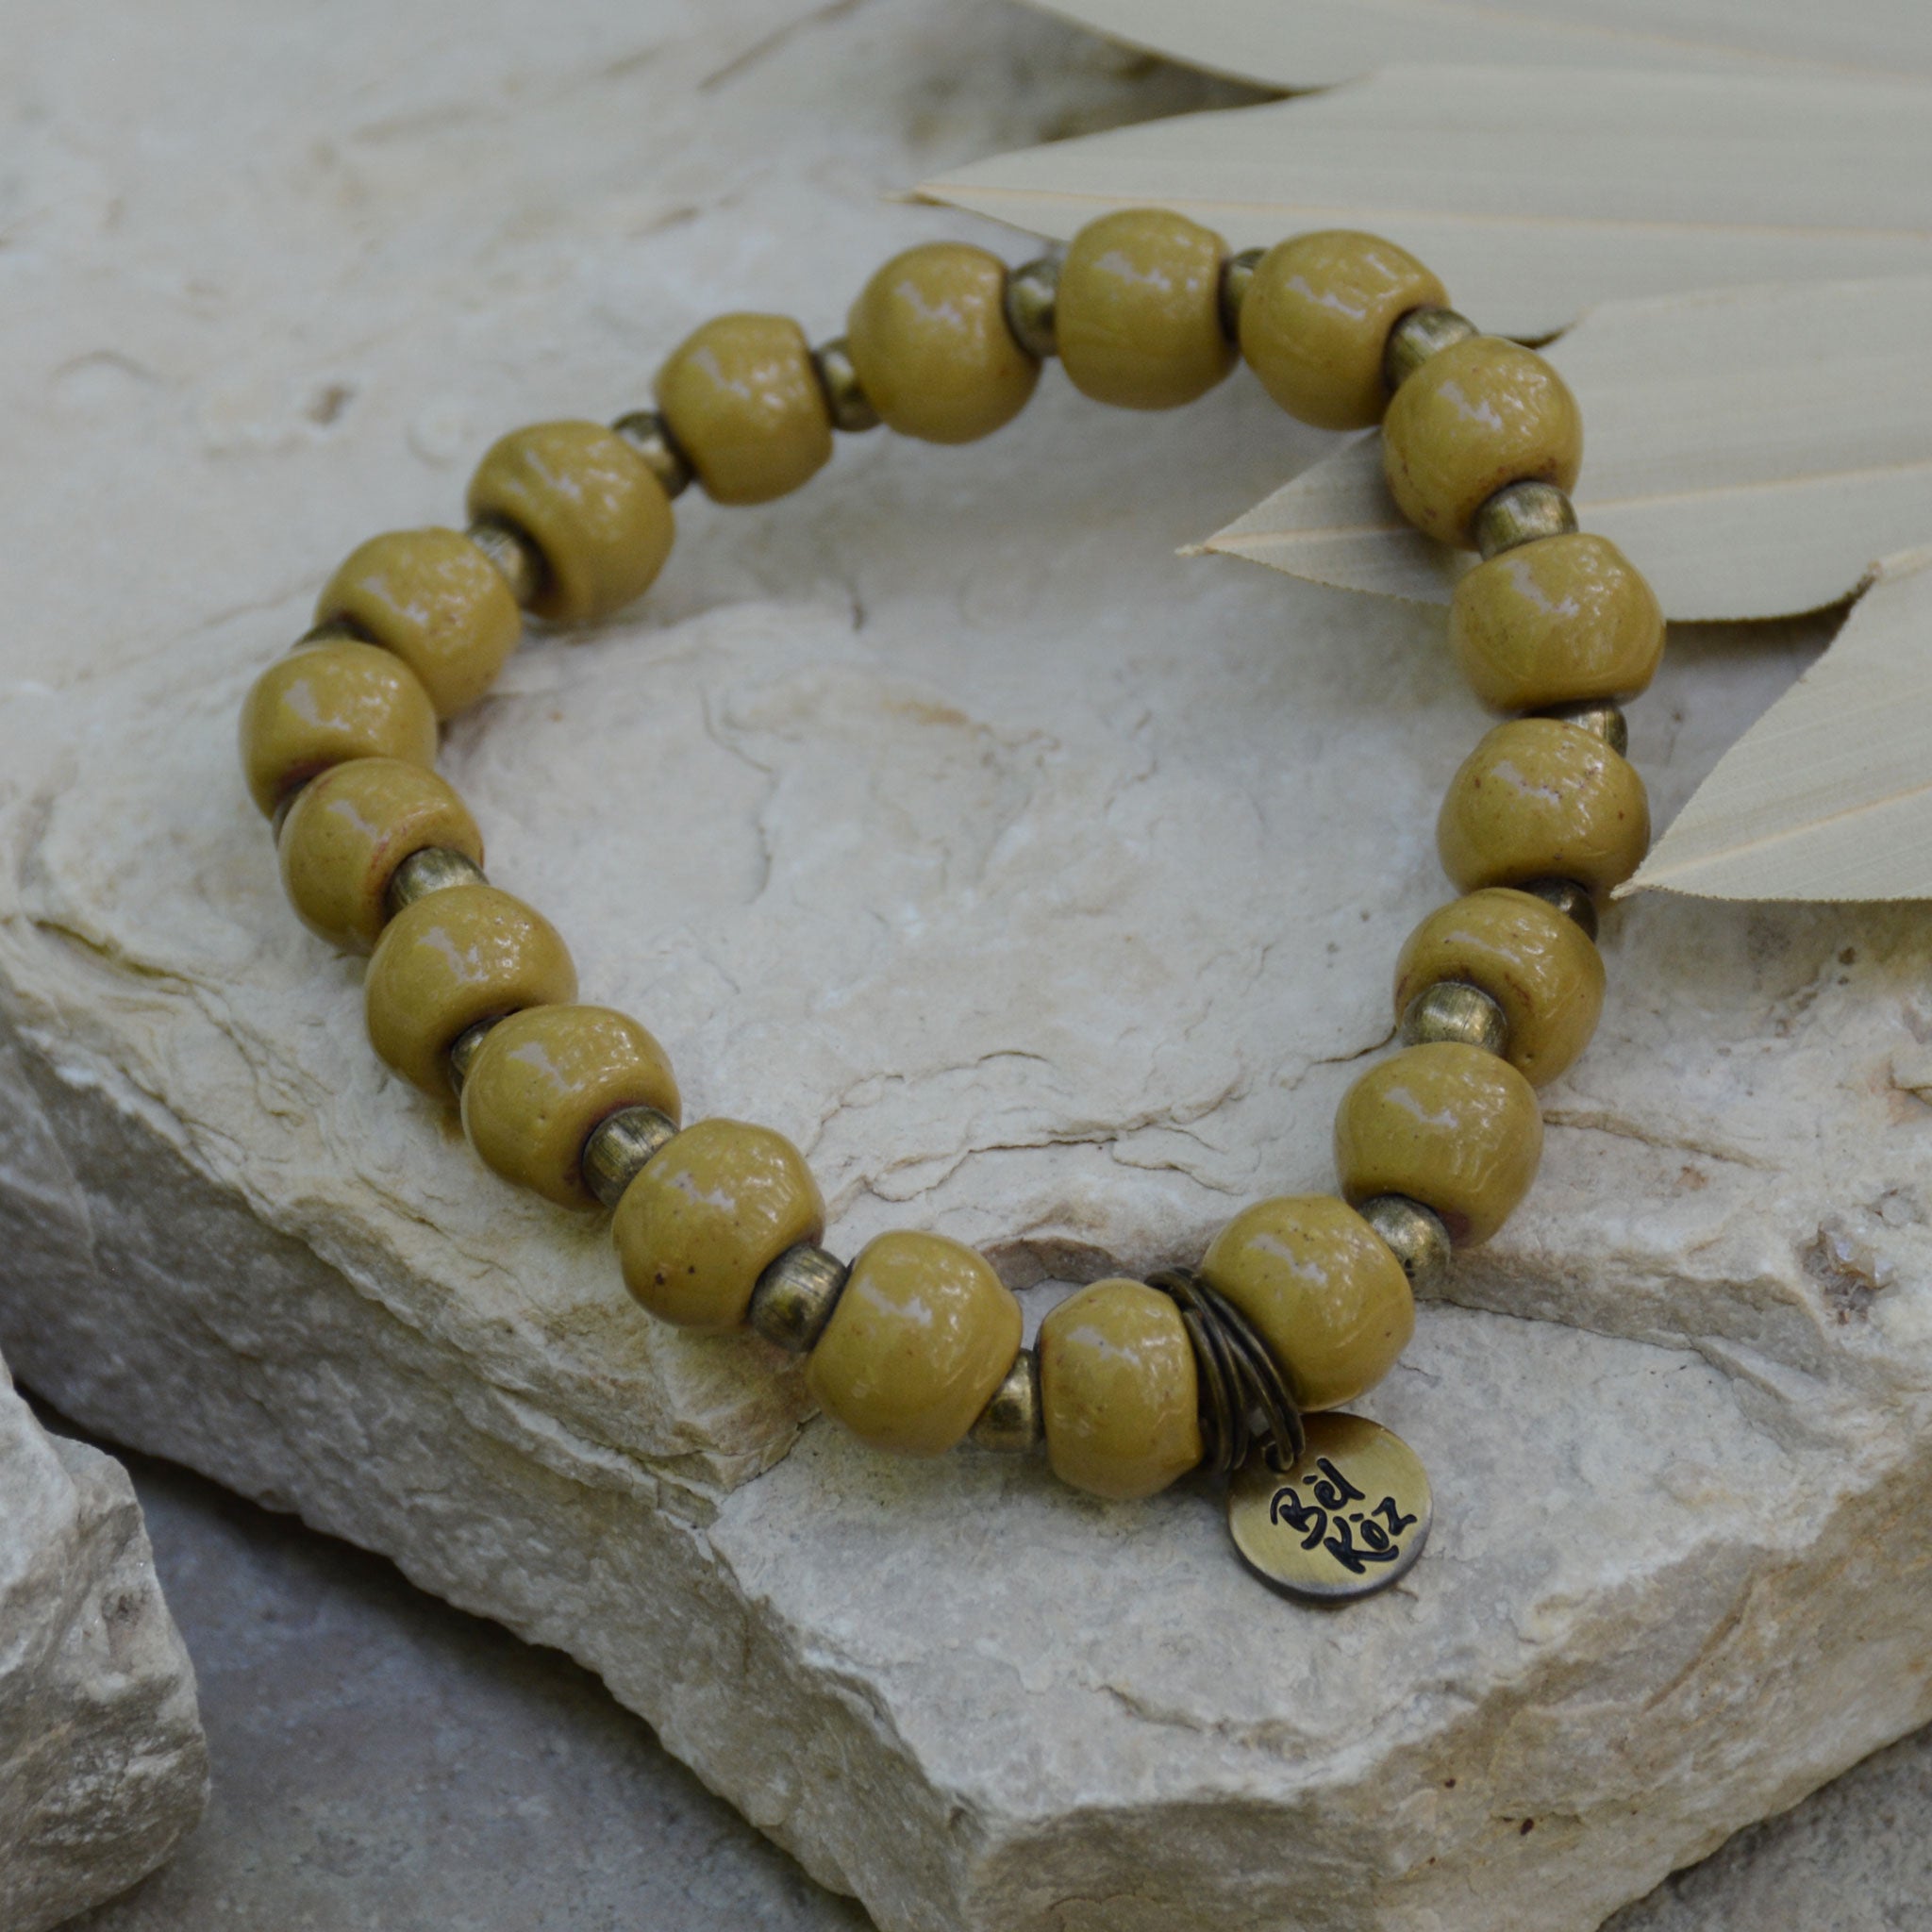 Bel Koz Clay Bead Bracelet - Several Colors Available!